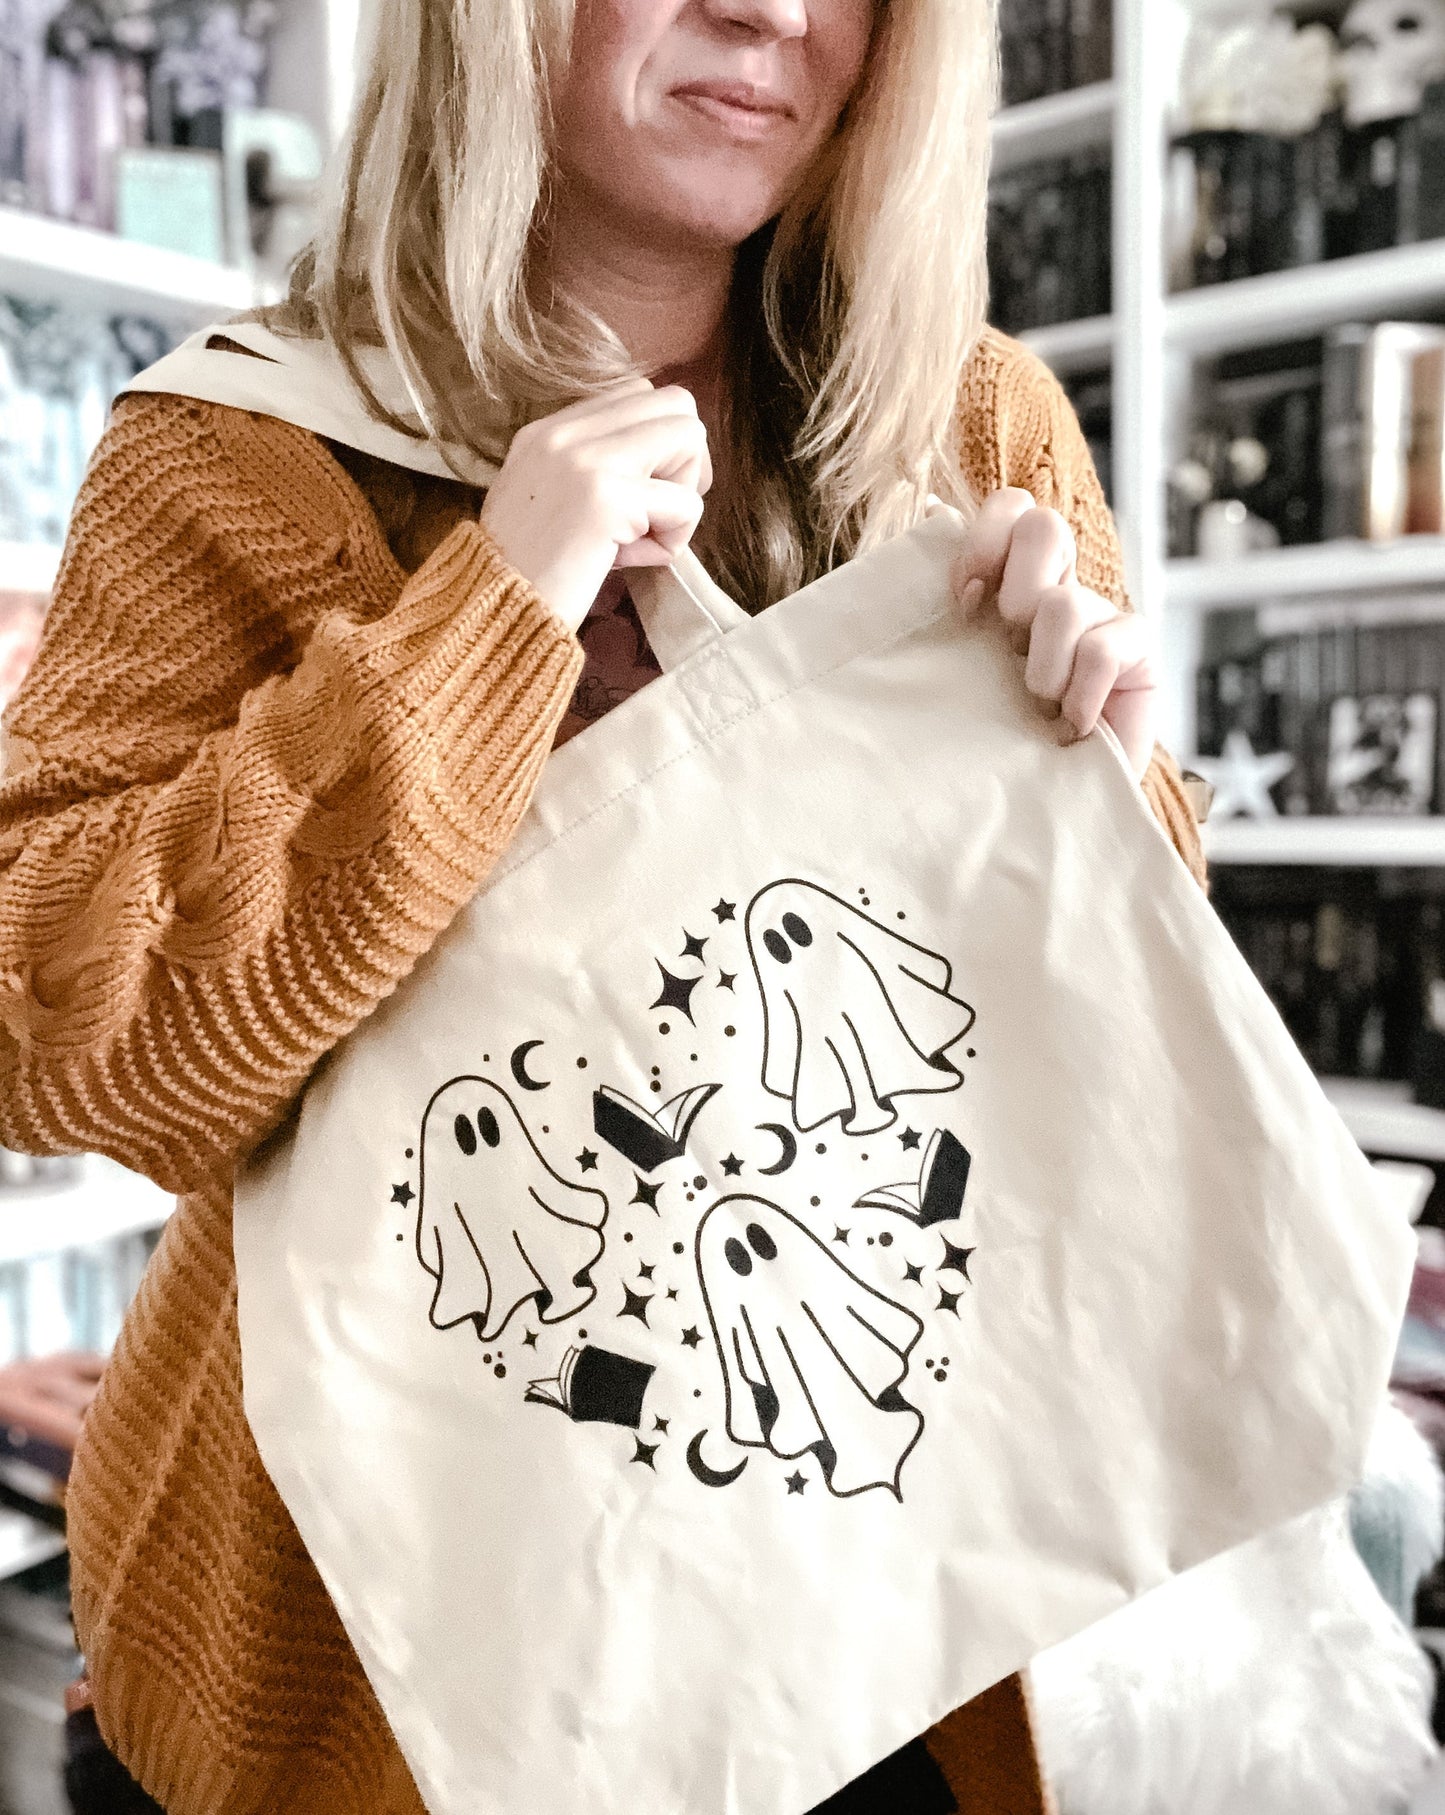 Boo Books Eco Tote Bag for FireDrake Artistry Photo by @themommabookclub